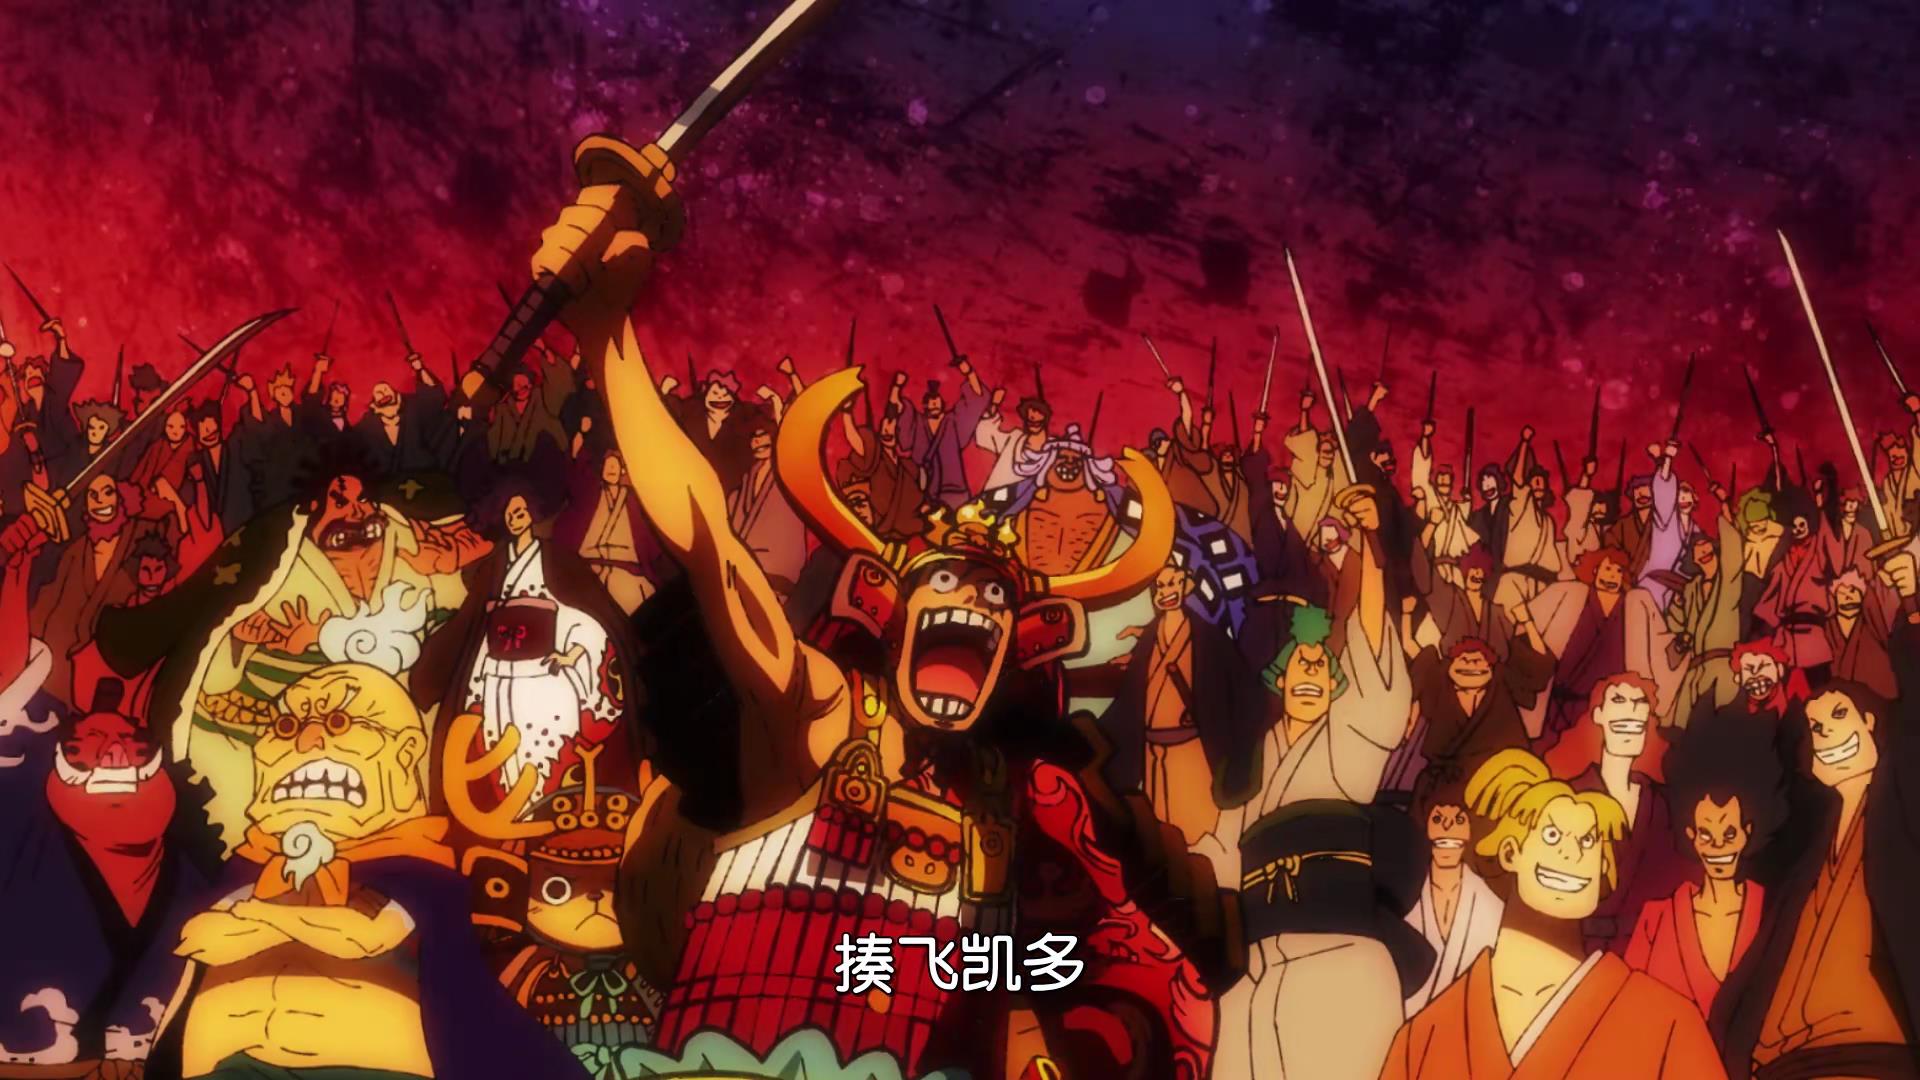 One Piece Episode 976 Denjiro Played Three Roles Luffy Led 4 0 People In A Decisive Battle Inews